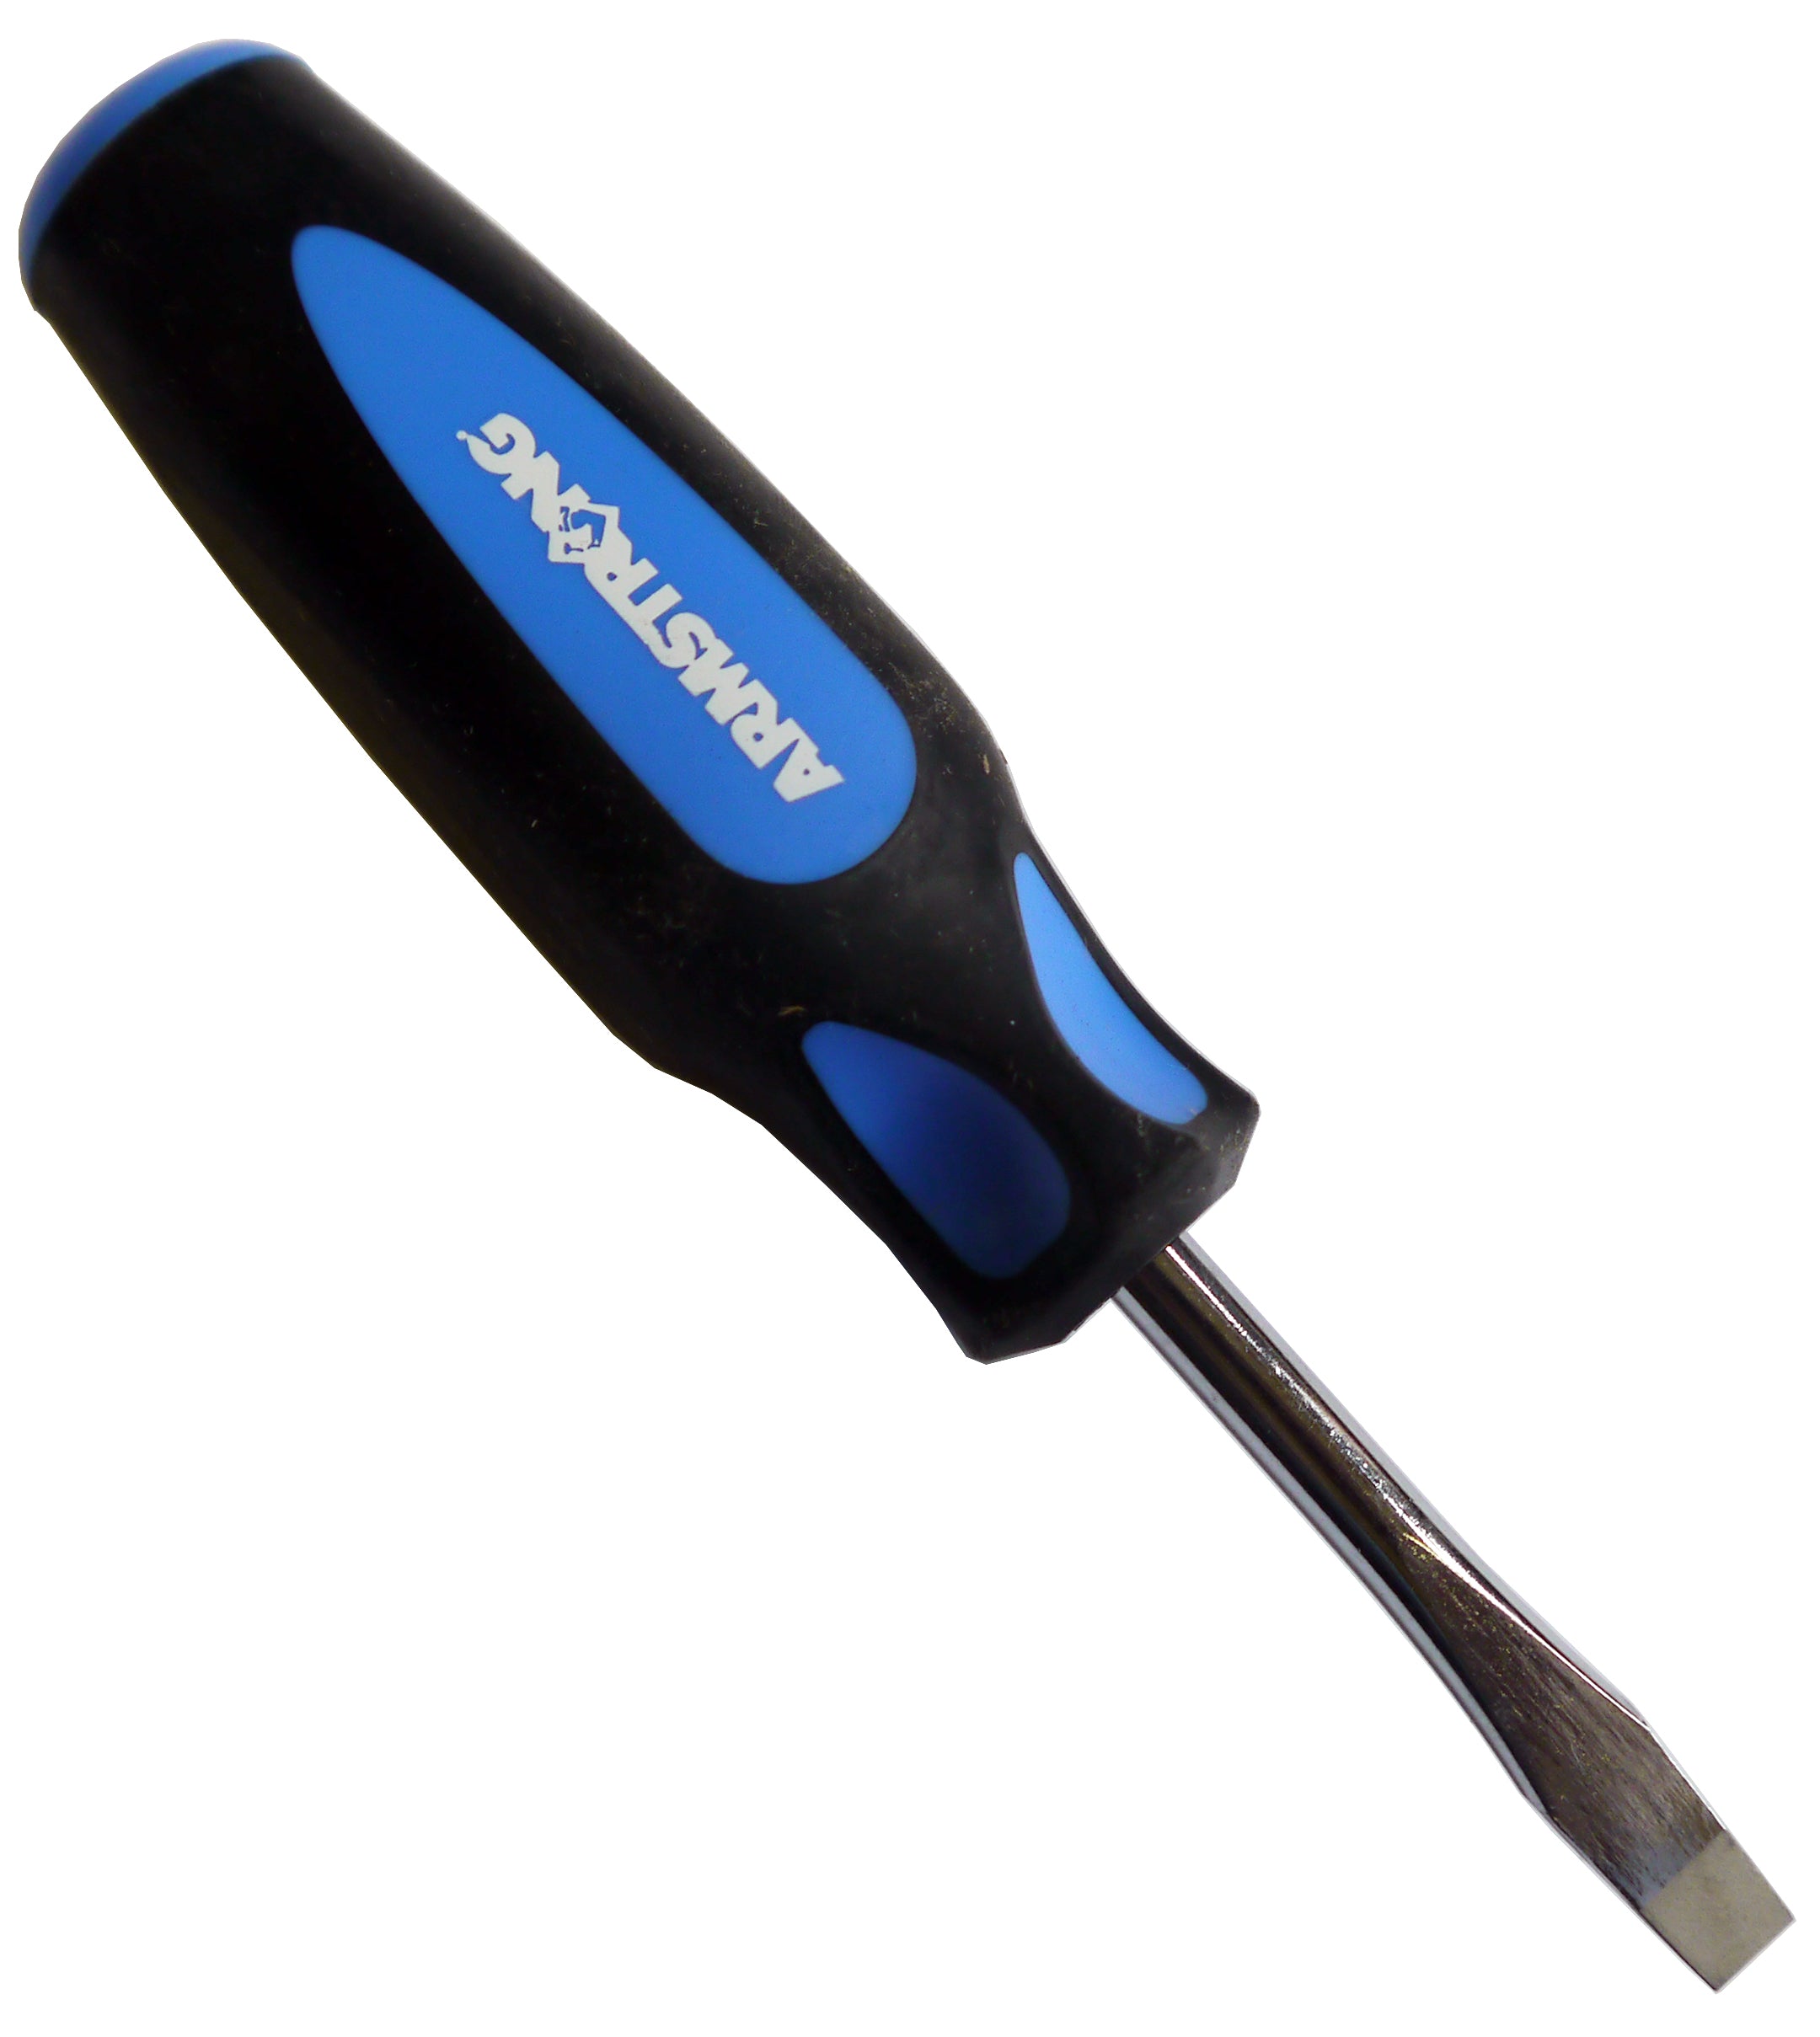 1/4 Armstrong Slotted Screwdriver (66-440) made by Western Forge